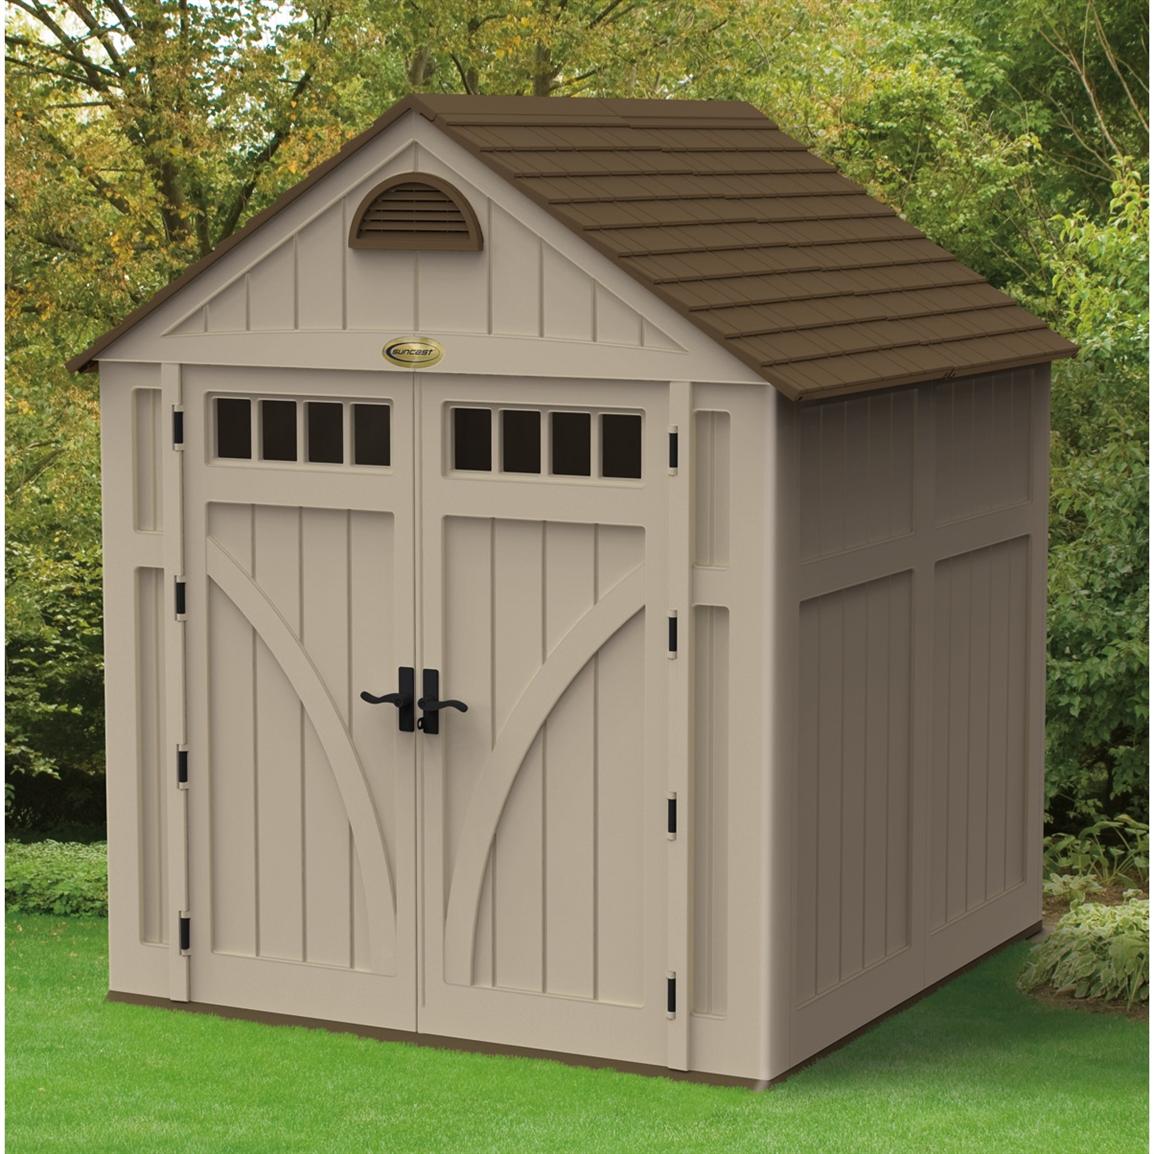 Suncast® 7 x 7' Shed - 202216, Sheds at Sportsman's Guide